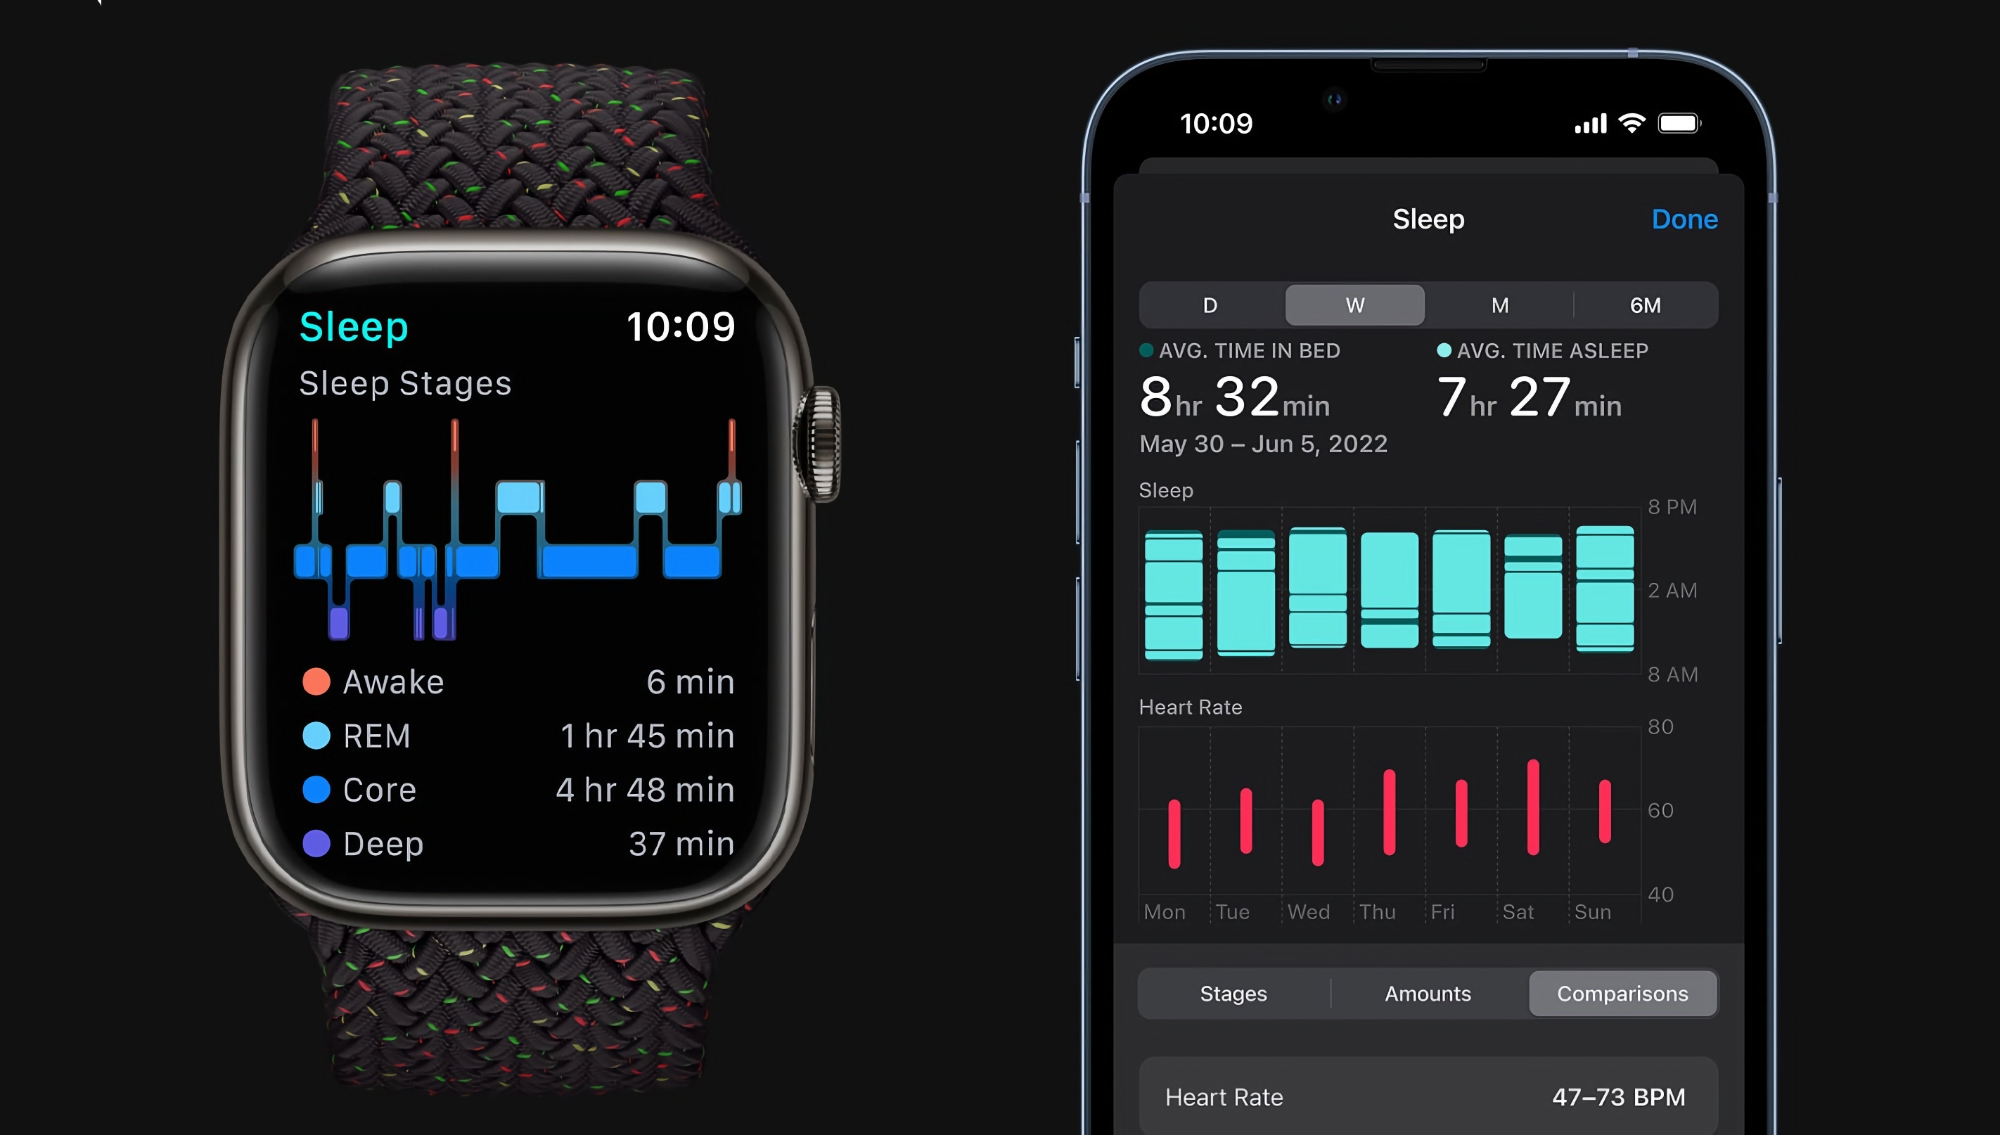 With watchOS 11: Apple Watch will be able to automatically track a user's sleep